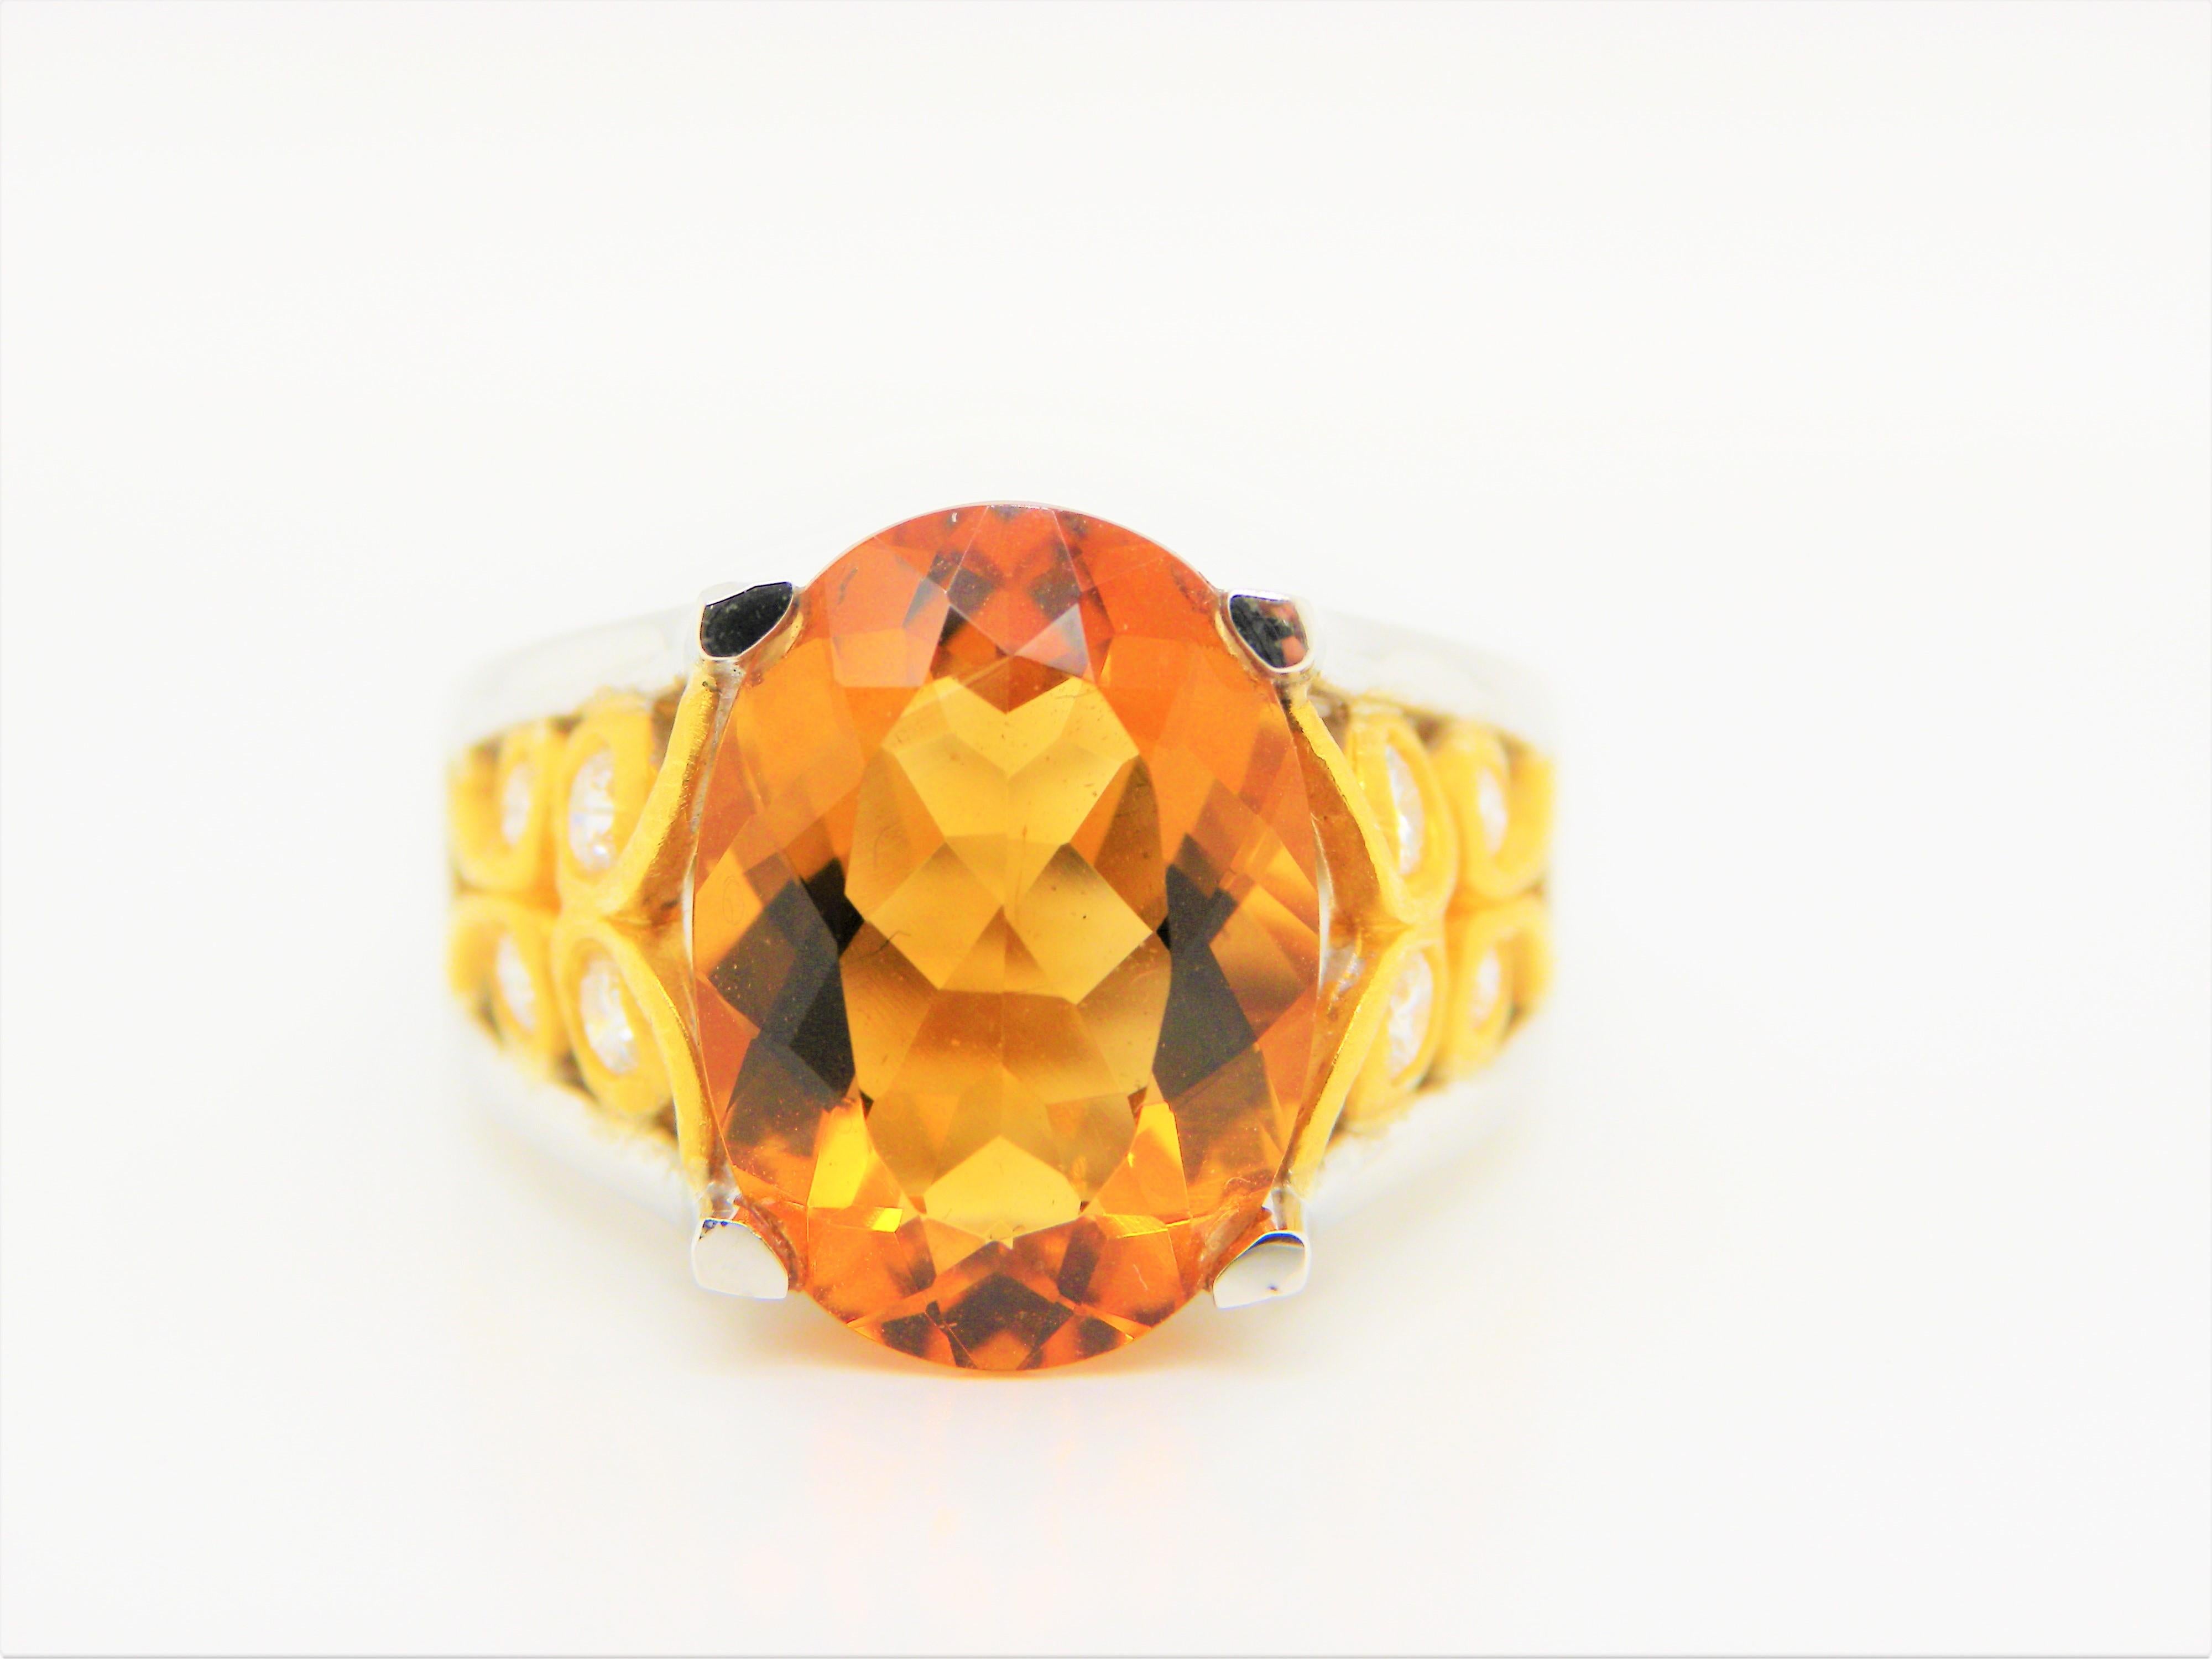 4.8 Carat Citrine And Diamond Gold Cocktail Ring:

A gorgeous looking Art-Deco inspired Citrine and Diamond Ring, perfect for cocktail events and dinner parties! The vivid orangey-brown Citrine weighs 4.8 carat, with flawless clarity and excellent